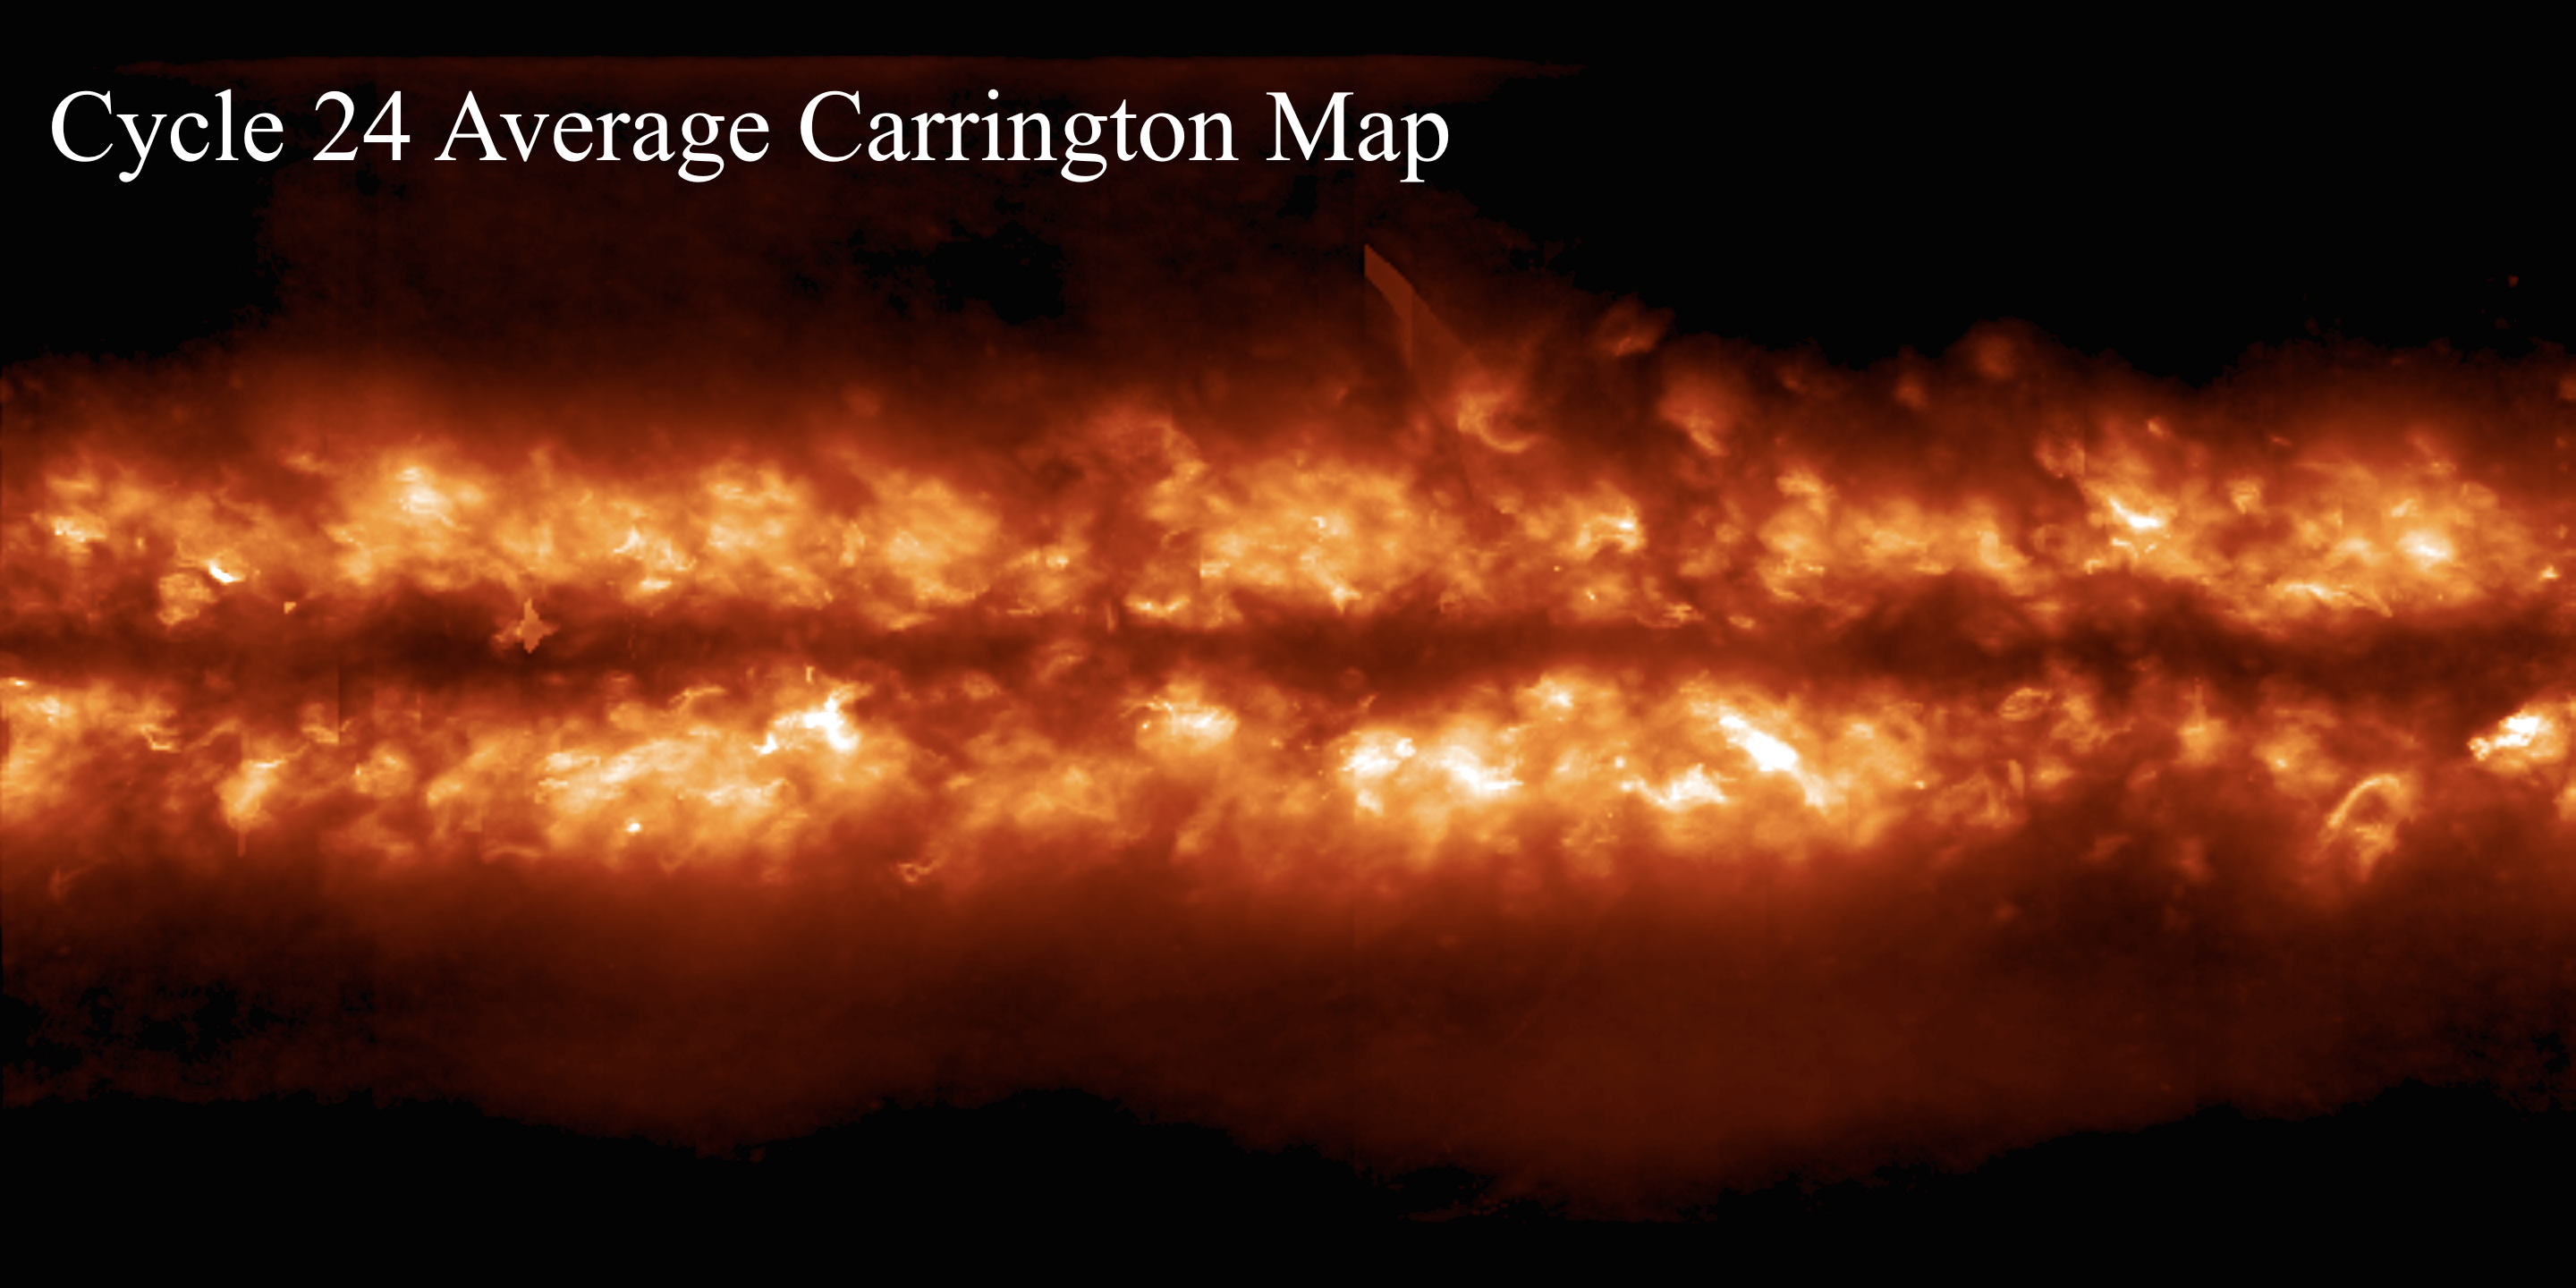 Average Carrington map for Cycle 24